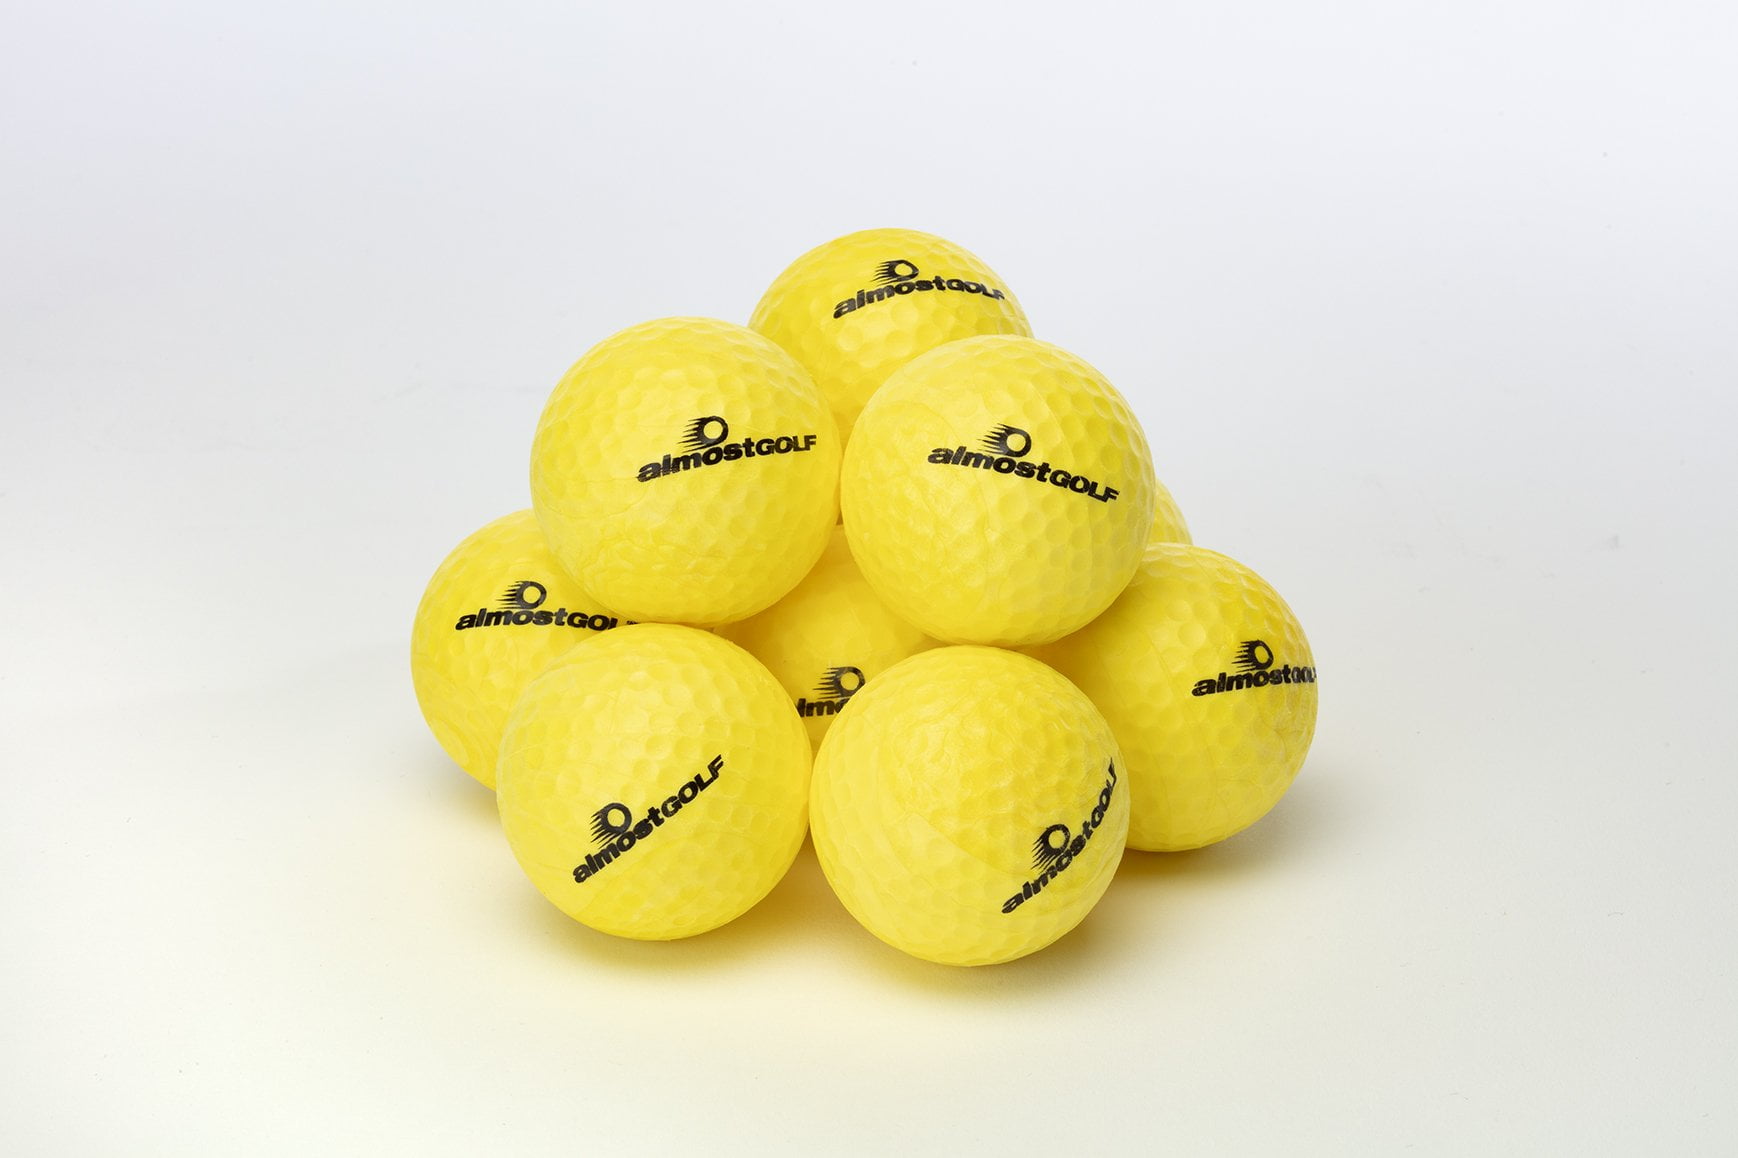 ALMOSTGOLF Point3 Limited Flight Practice Golf Balls – Realistic Spin,  Trajectory, & Accuracy Foam Training Balls Pack of 10, Hi-Vis Yellow